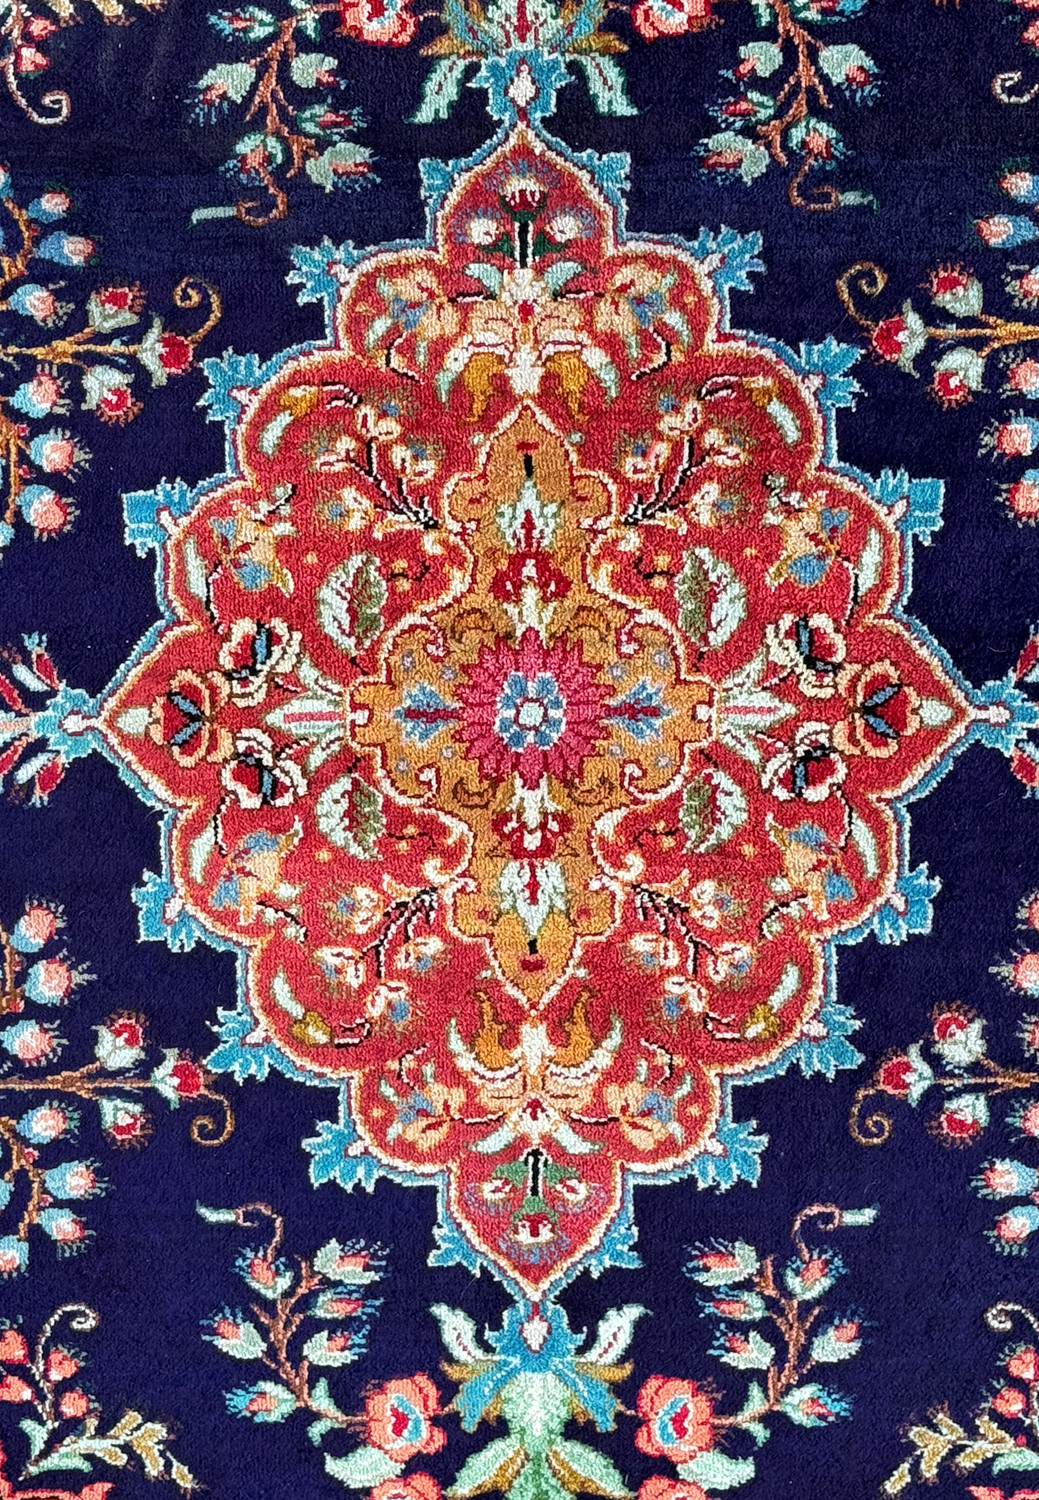 Detailed view of the lush floral patterns and gold accents on the rich navy blue field of a Persian Qum silk rug